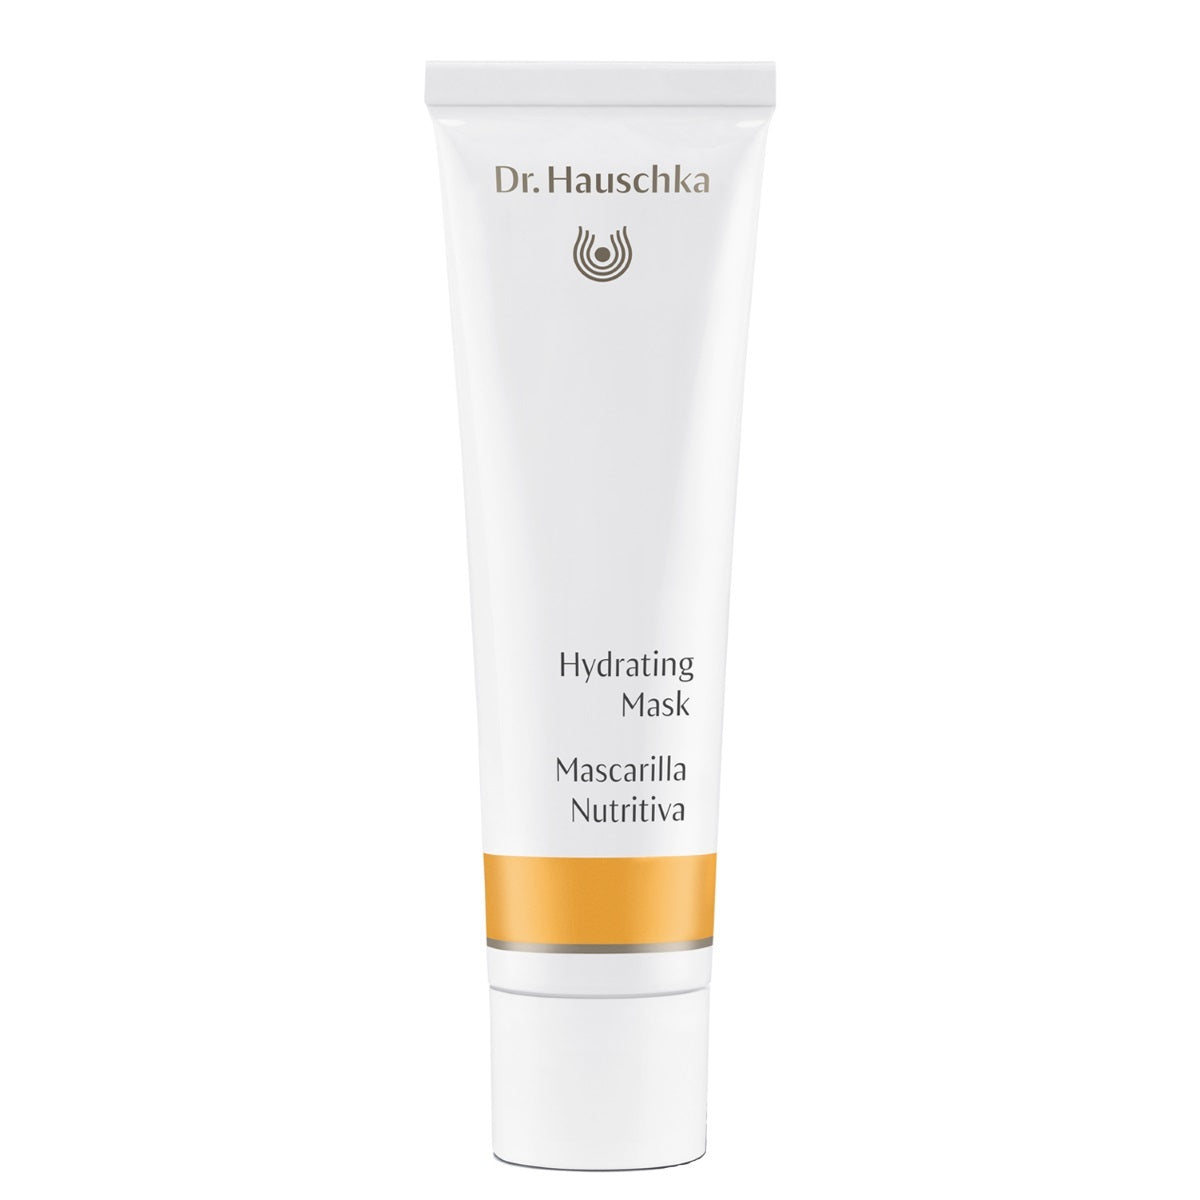 Primary image of Hydrating Mask